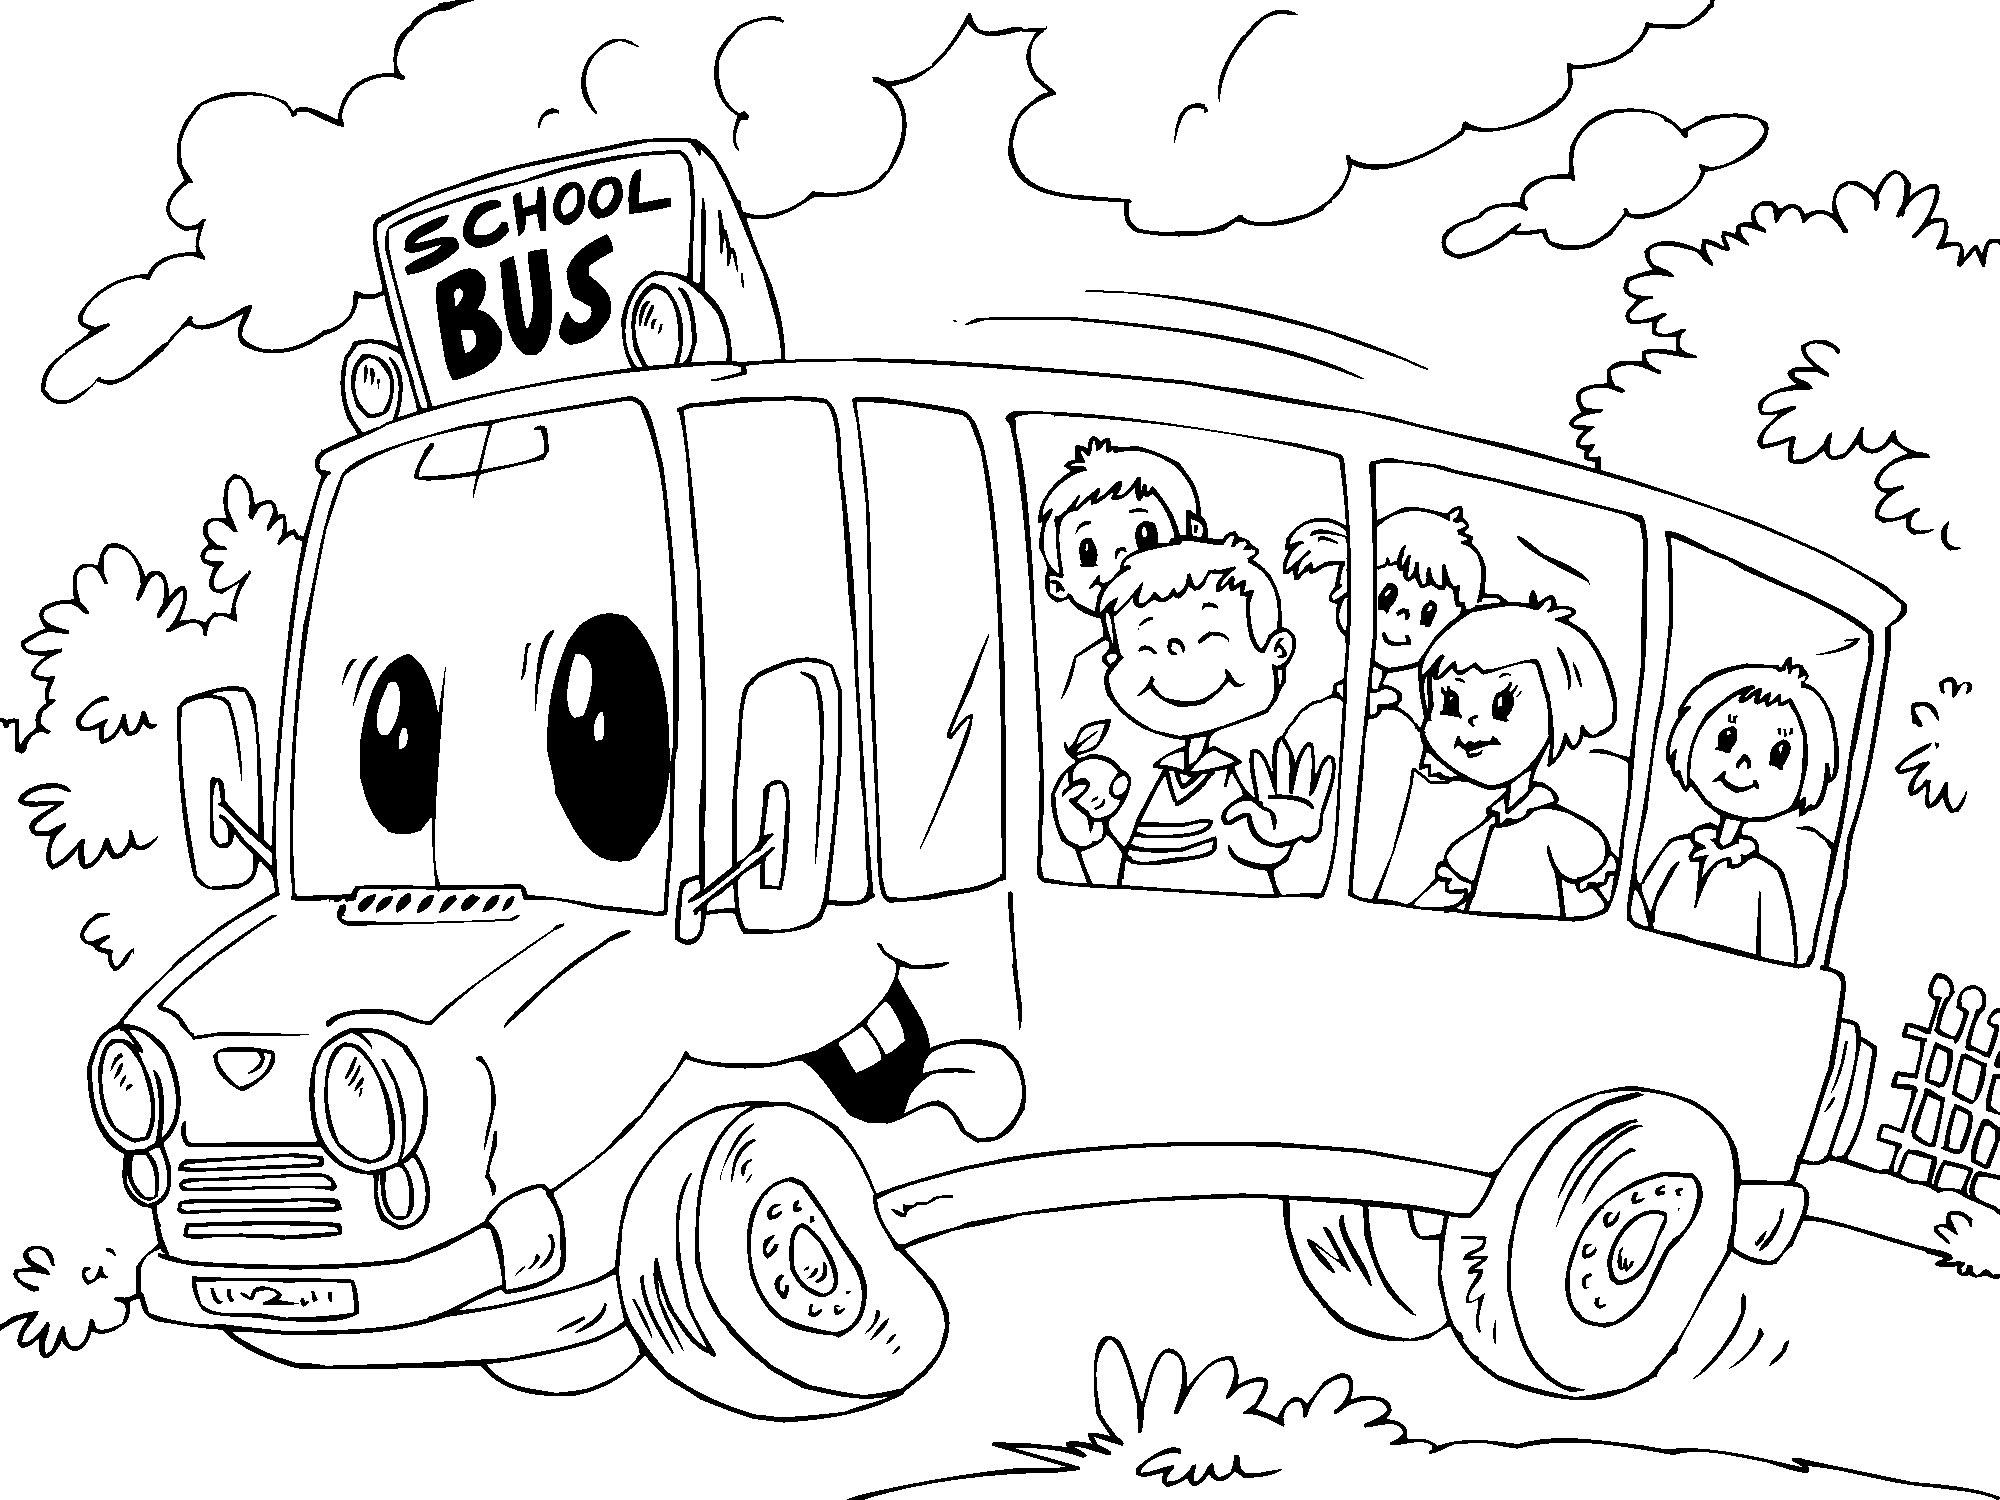 School Bus Back To School Coloring Page Printable | Images and Photos ...